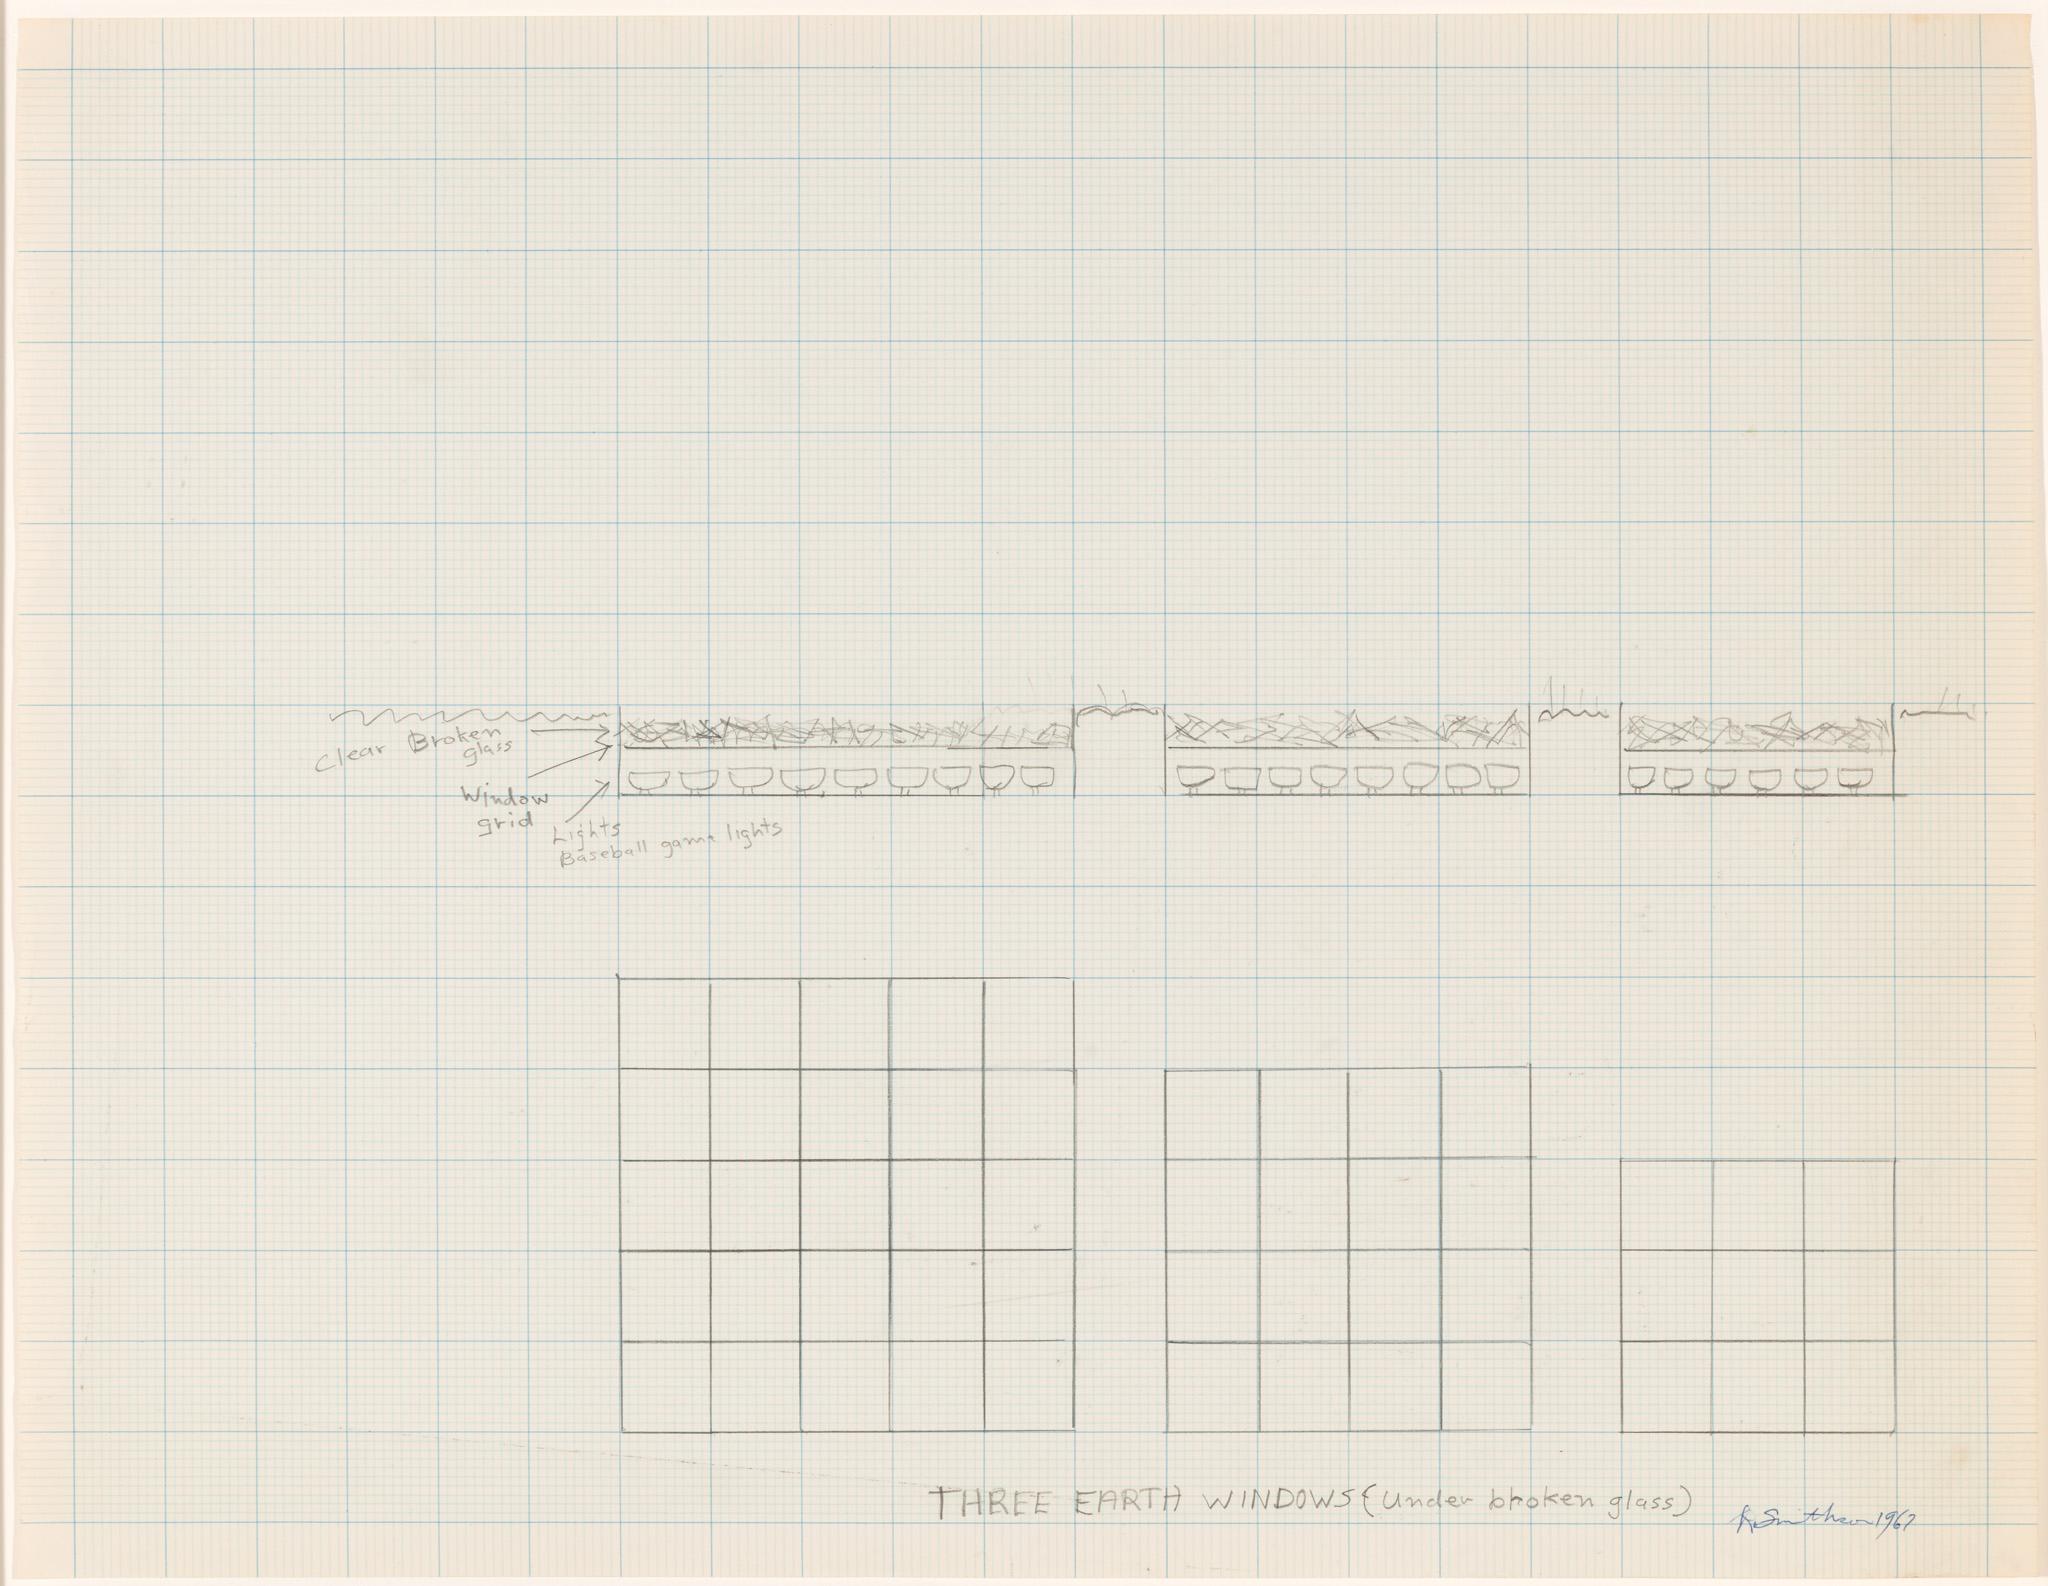 a drawing on graph paper by Robert Smithson of three earth windows